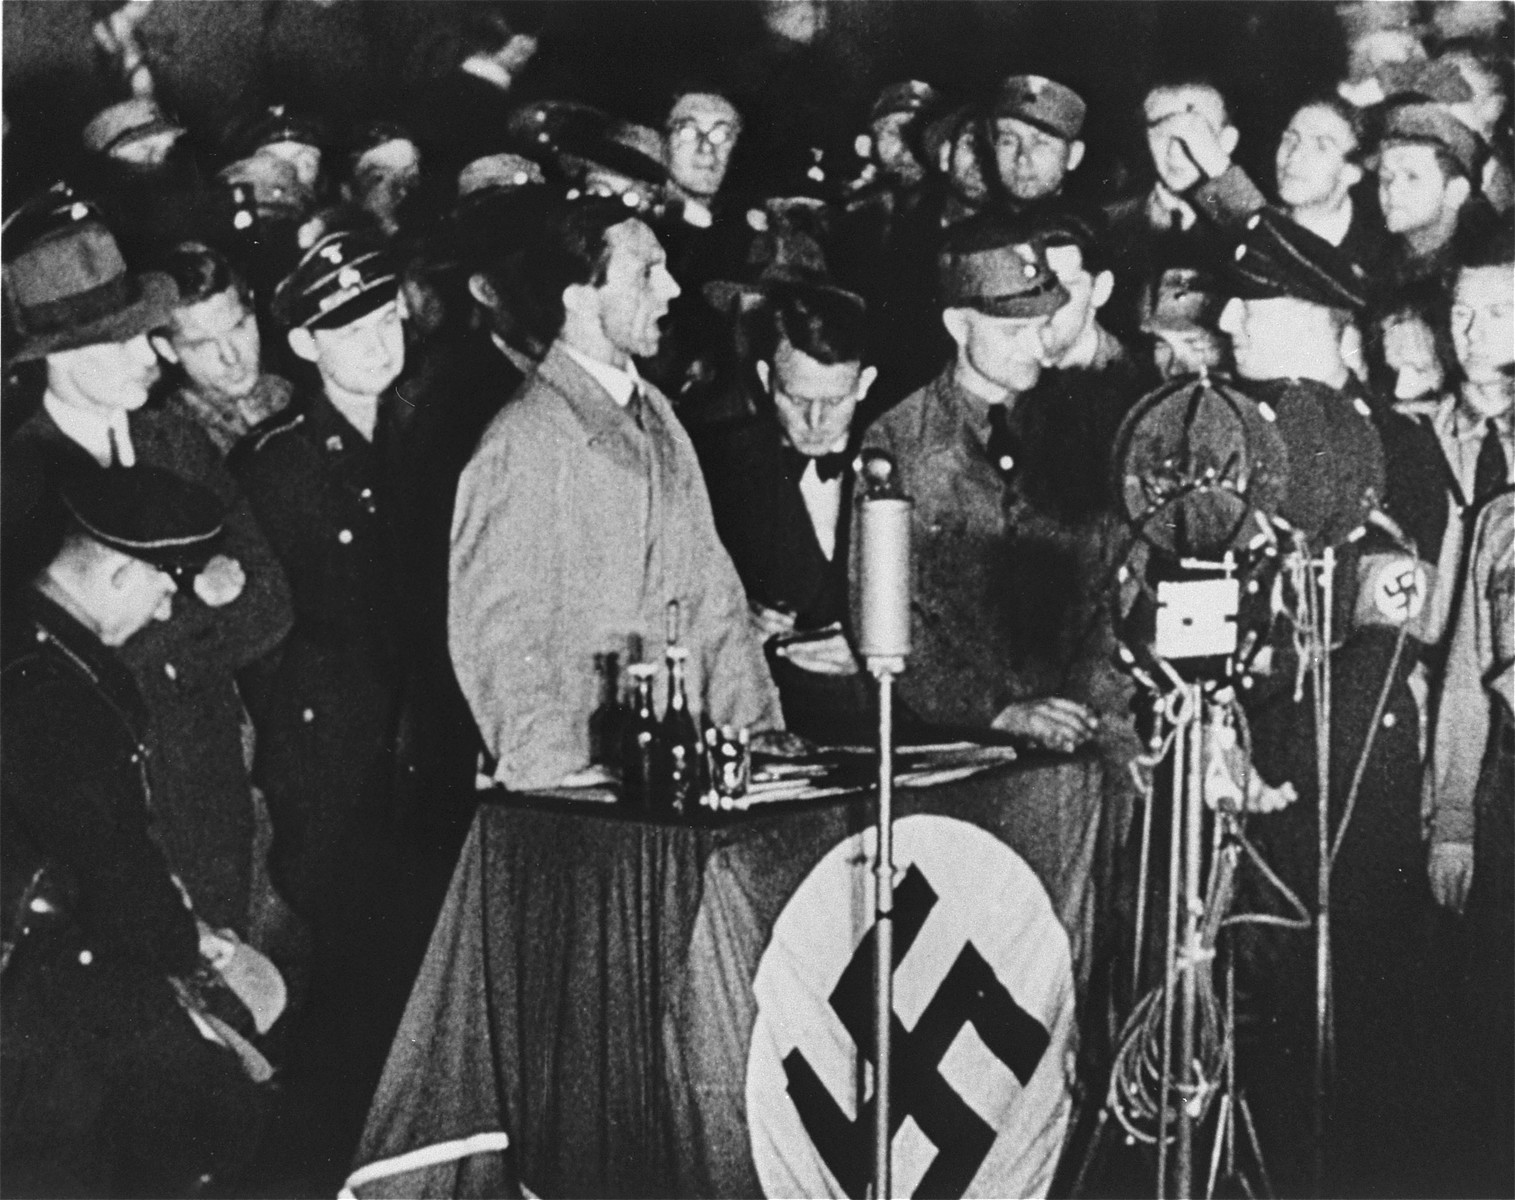 Reich Minister for Public Enlightenment and Propaganda, Joseph Goebbels, delivers a speech during the book burning on the Opernplatz in Berlin. 

Still from a motion picture.